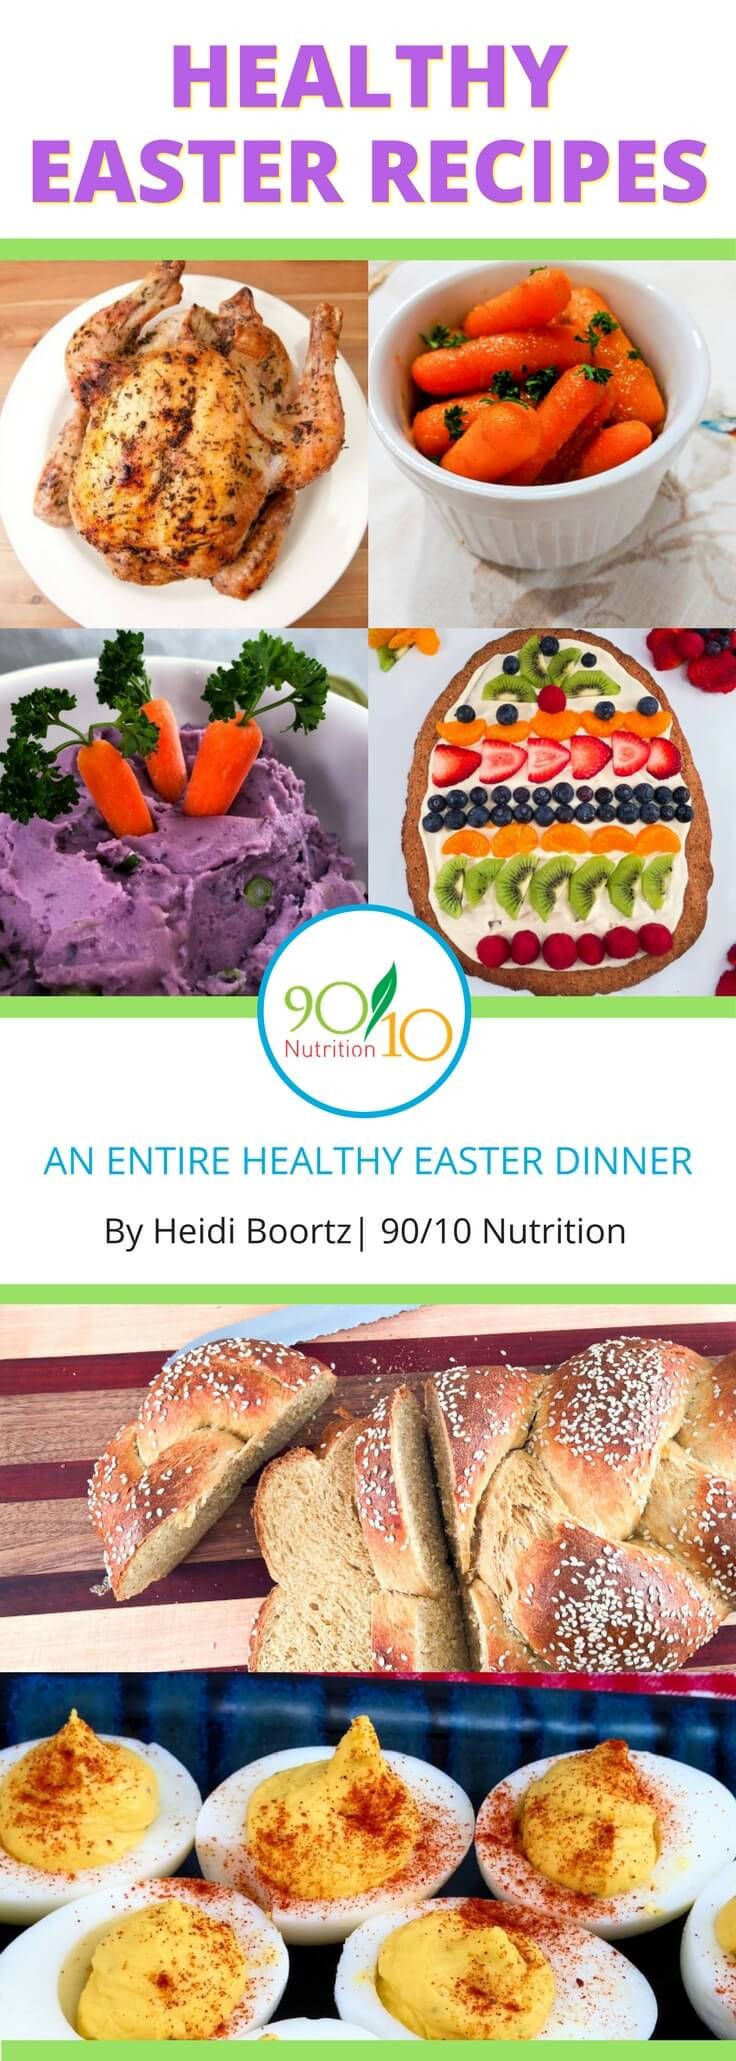 Healthy Easter Dinner Ideas
 Healthy Easter Recipes for a Healthy Easter Dinner 90 10